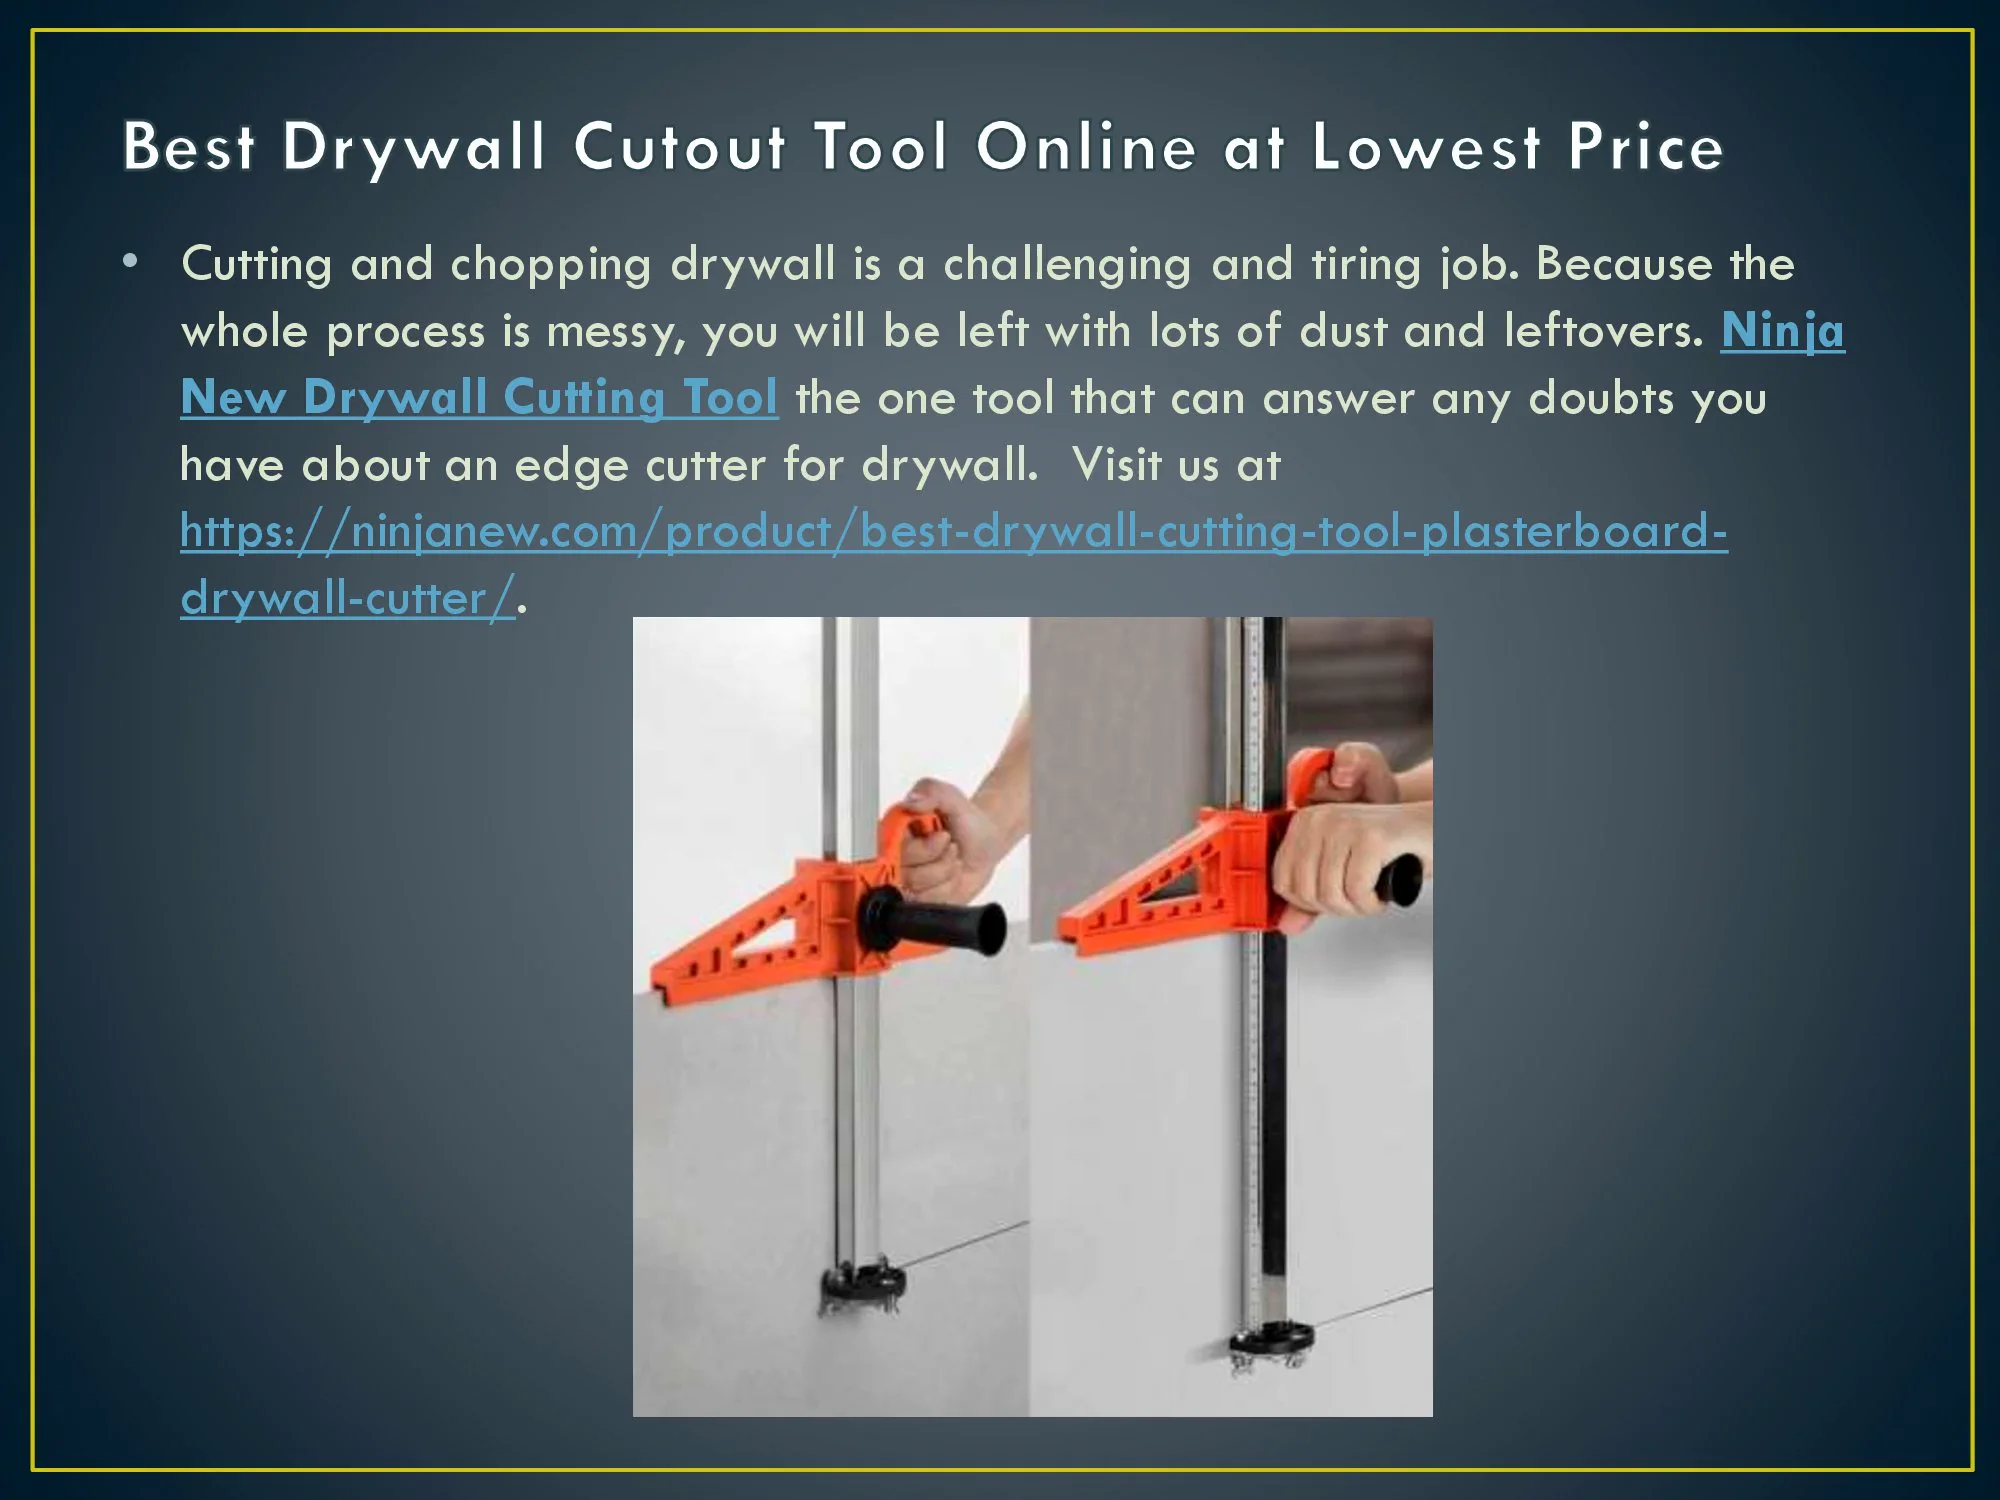 Best Drywall Cutout Tool Online at Lowest Price.mp4 on Vimeo